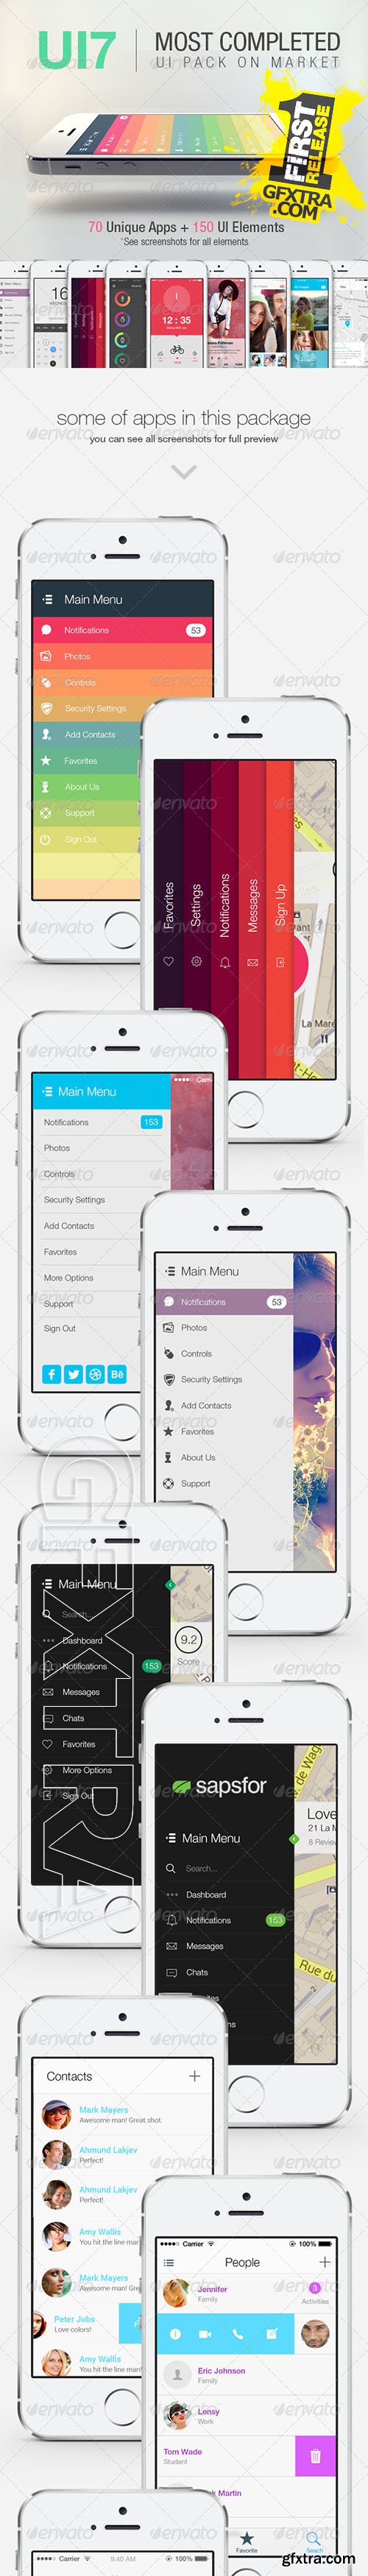 GraphicRiver - UI7 - Flat Bootstrap Mobile UI / Phone App 7812363